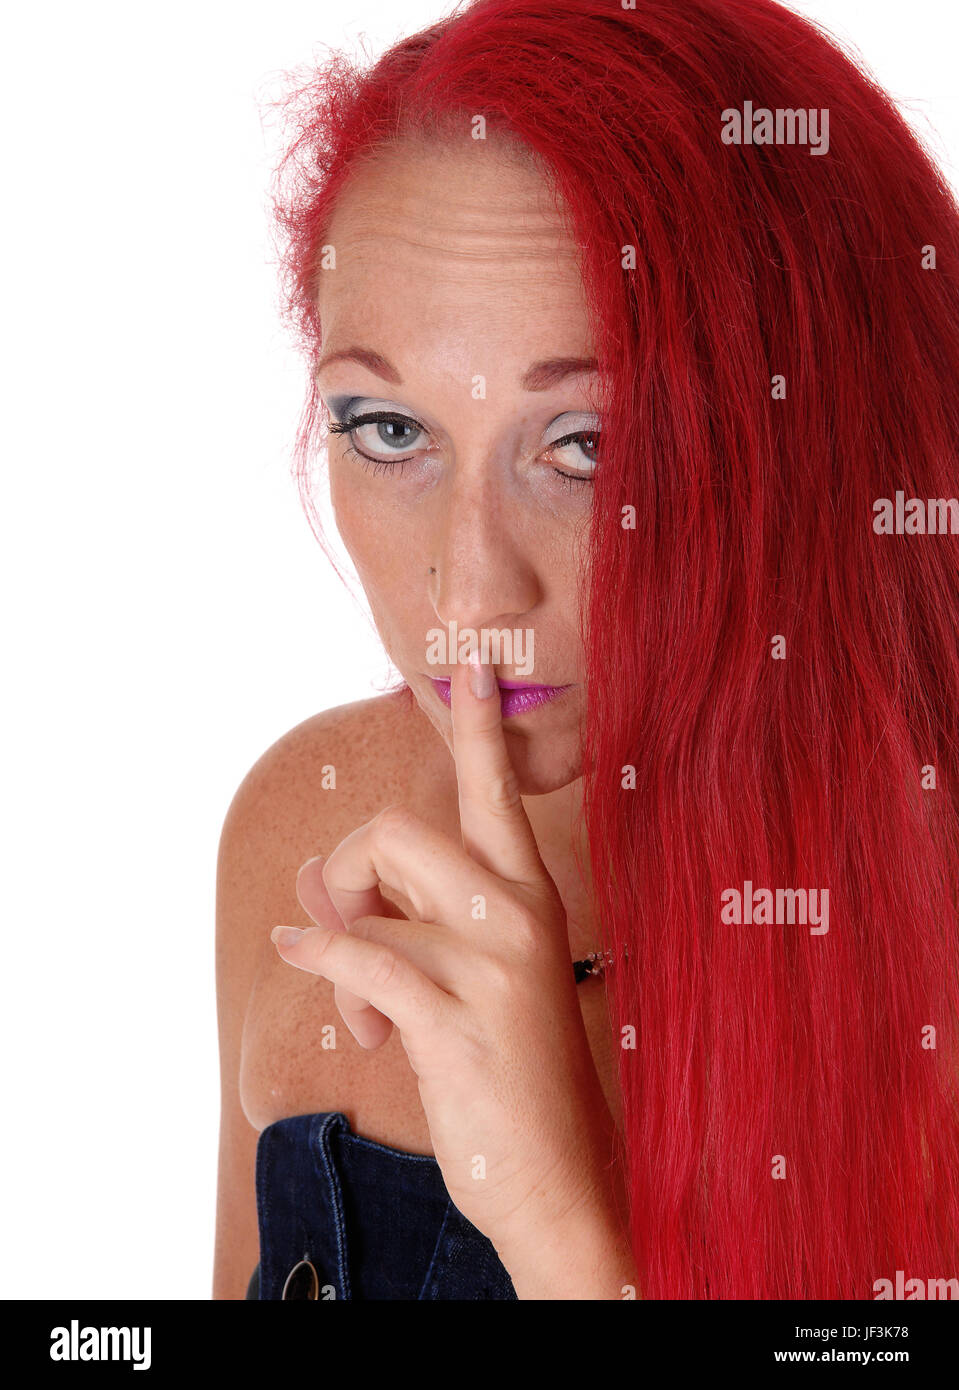 Woman with finger on mouth. Stock Photo